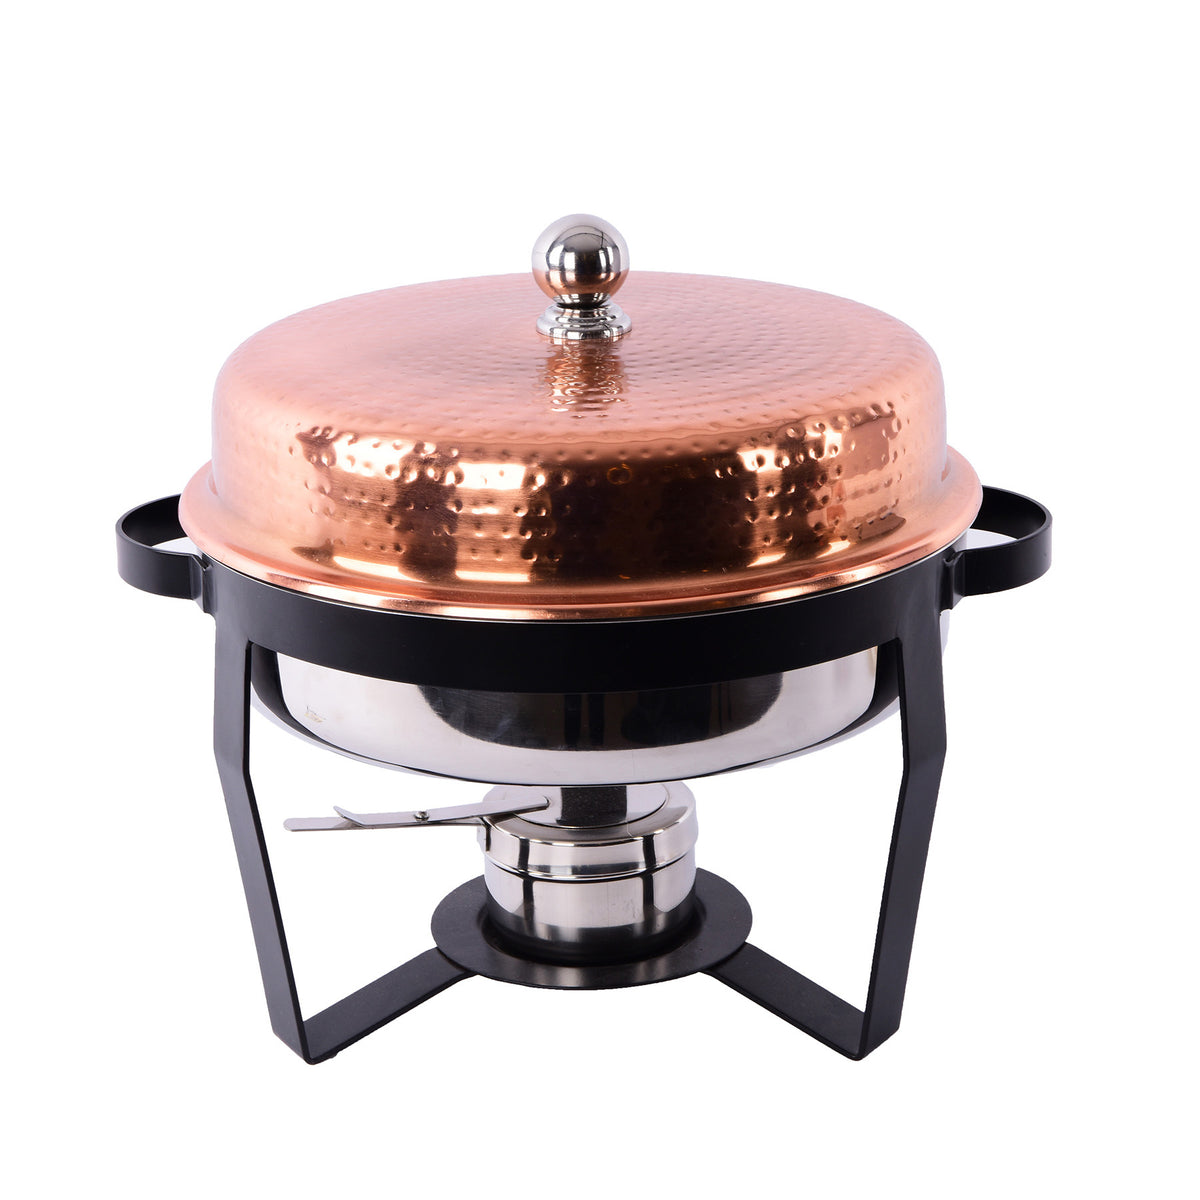 Round Chafing Dish with Copper Hammered Cover